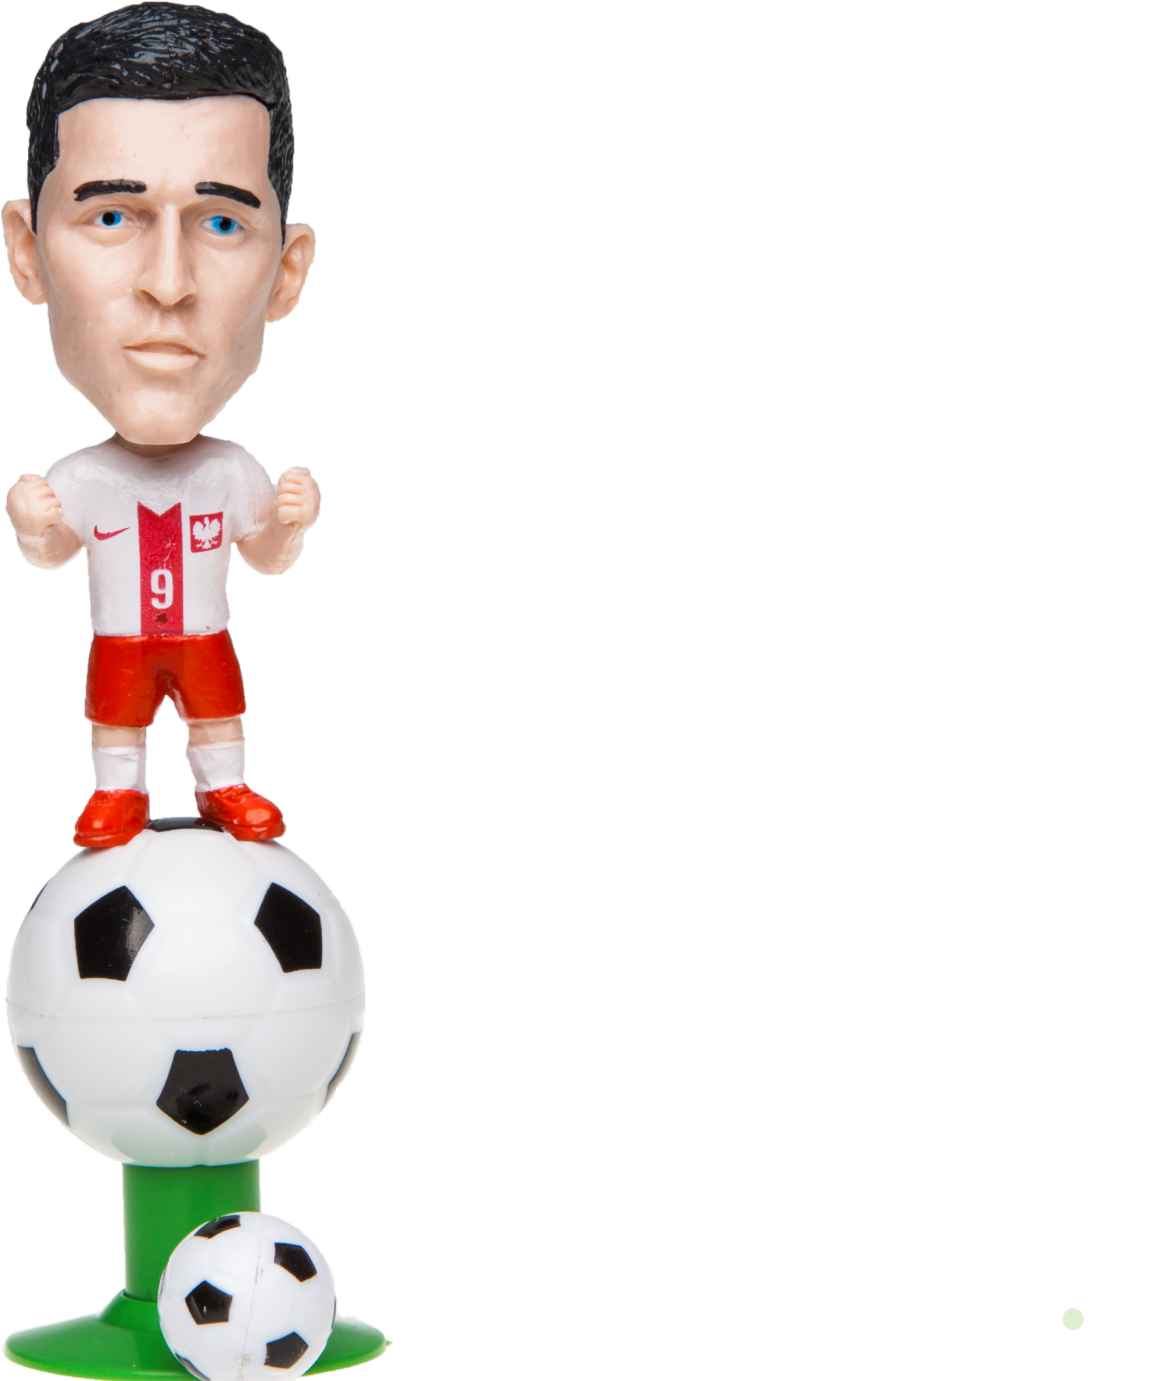 A Football Player On Top Of A Football Ball